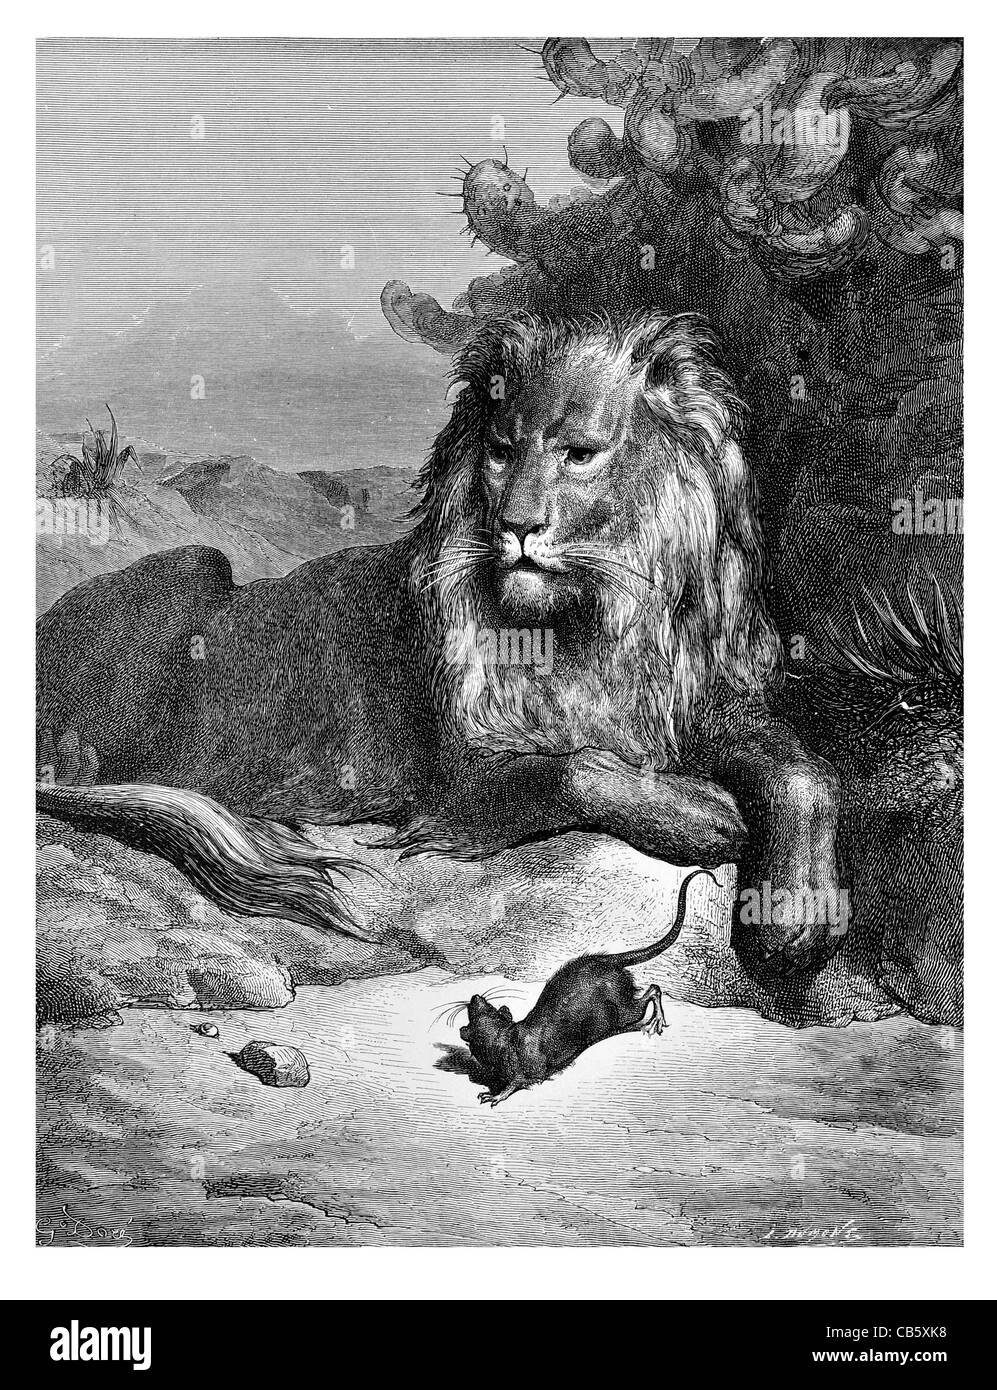 Fontaine Le lion et le rat The Lion and the Rat predator prey king jungle cactus desert sand rodent paw claw whiskers resting Stock Photo